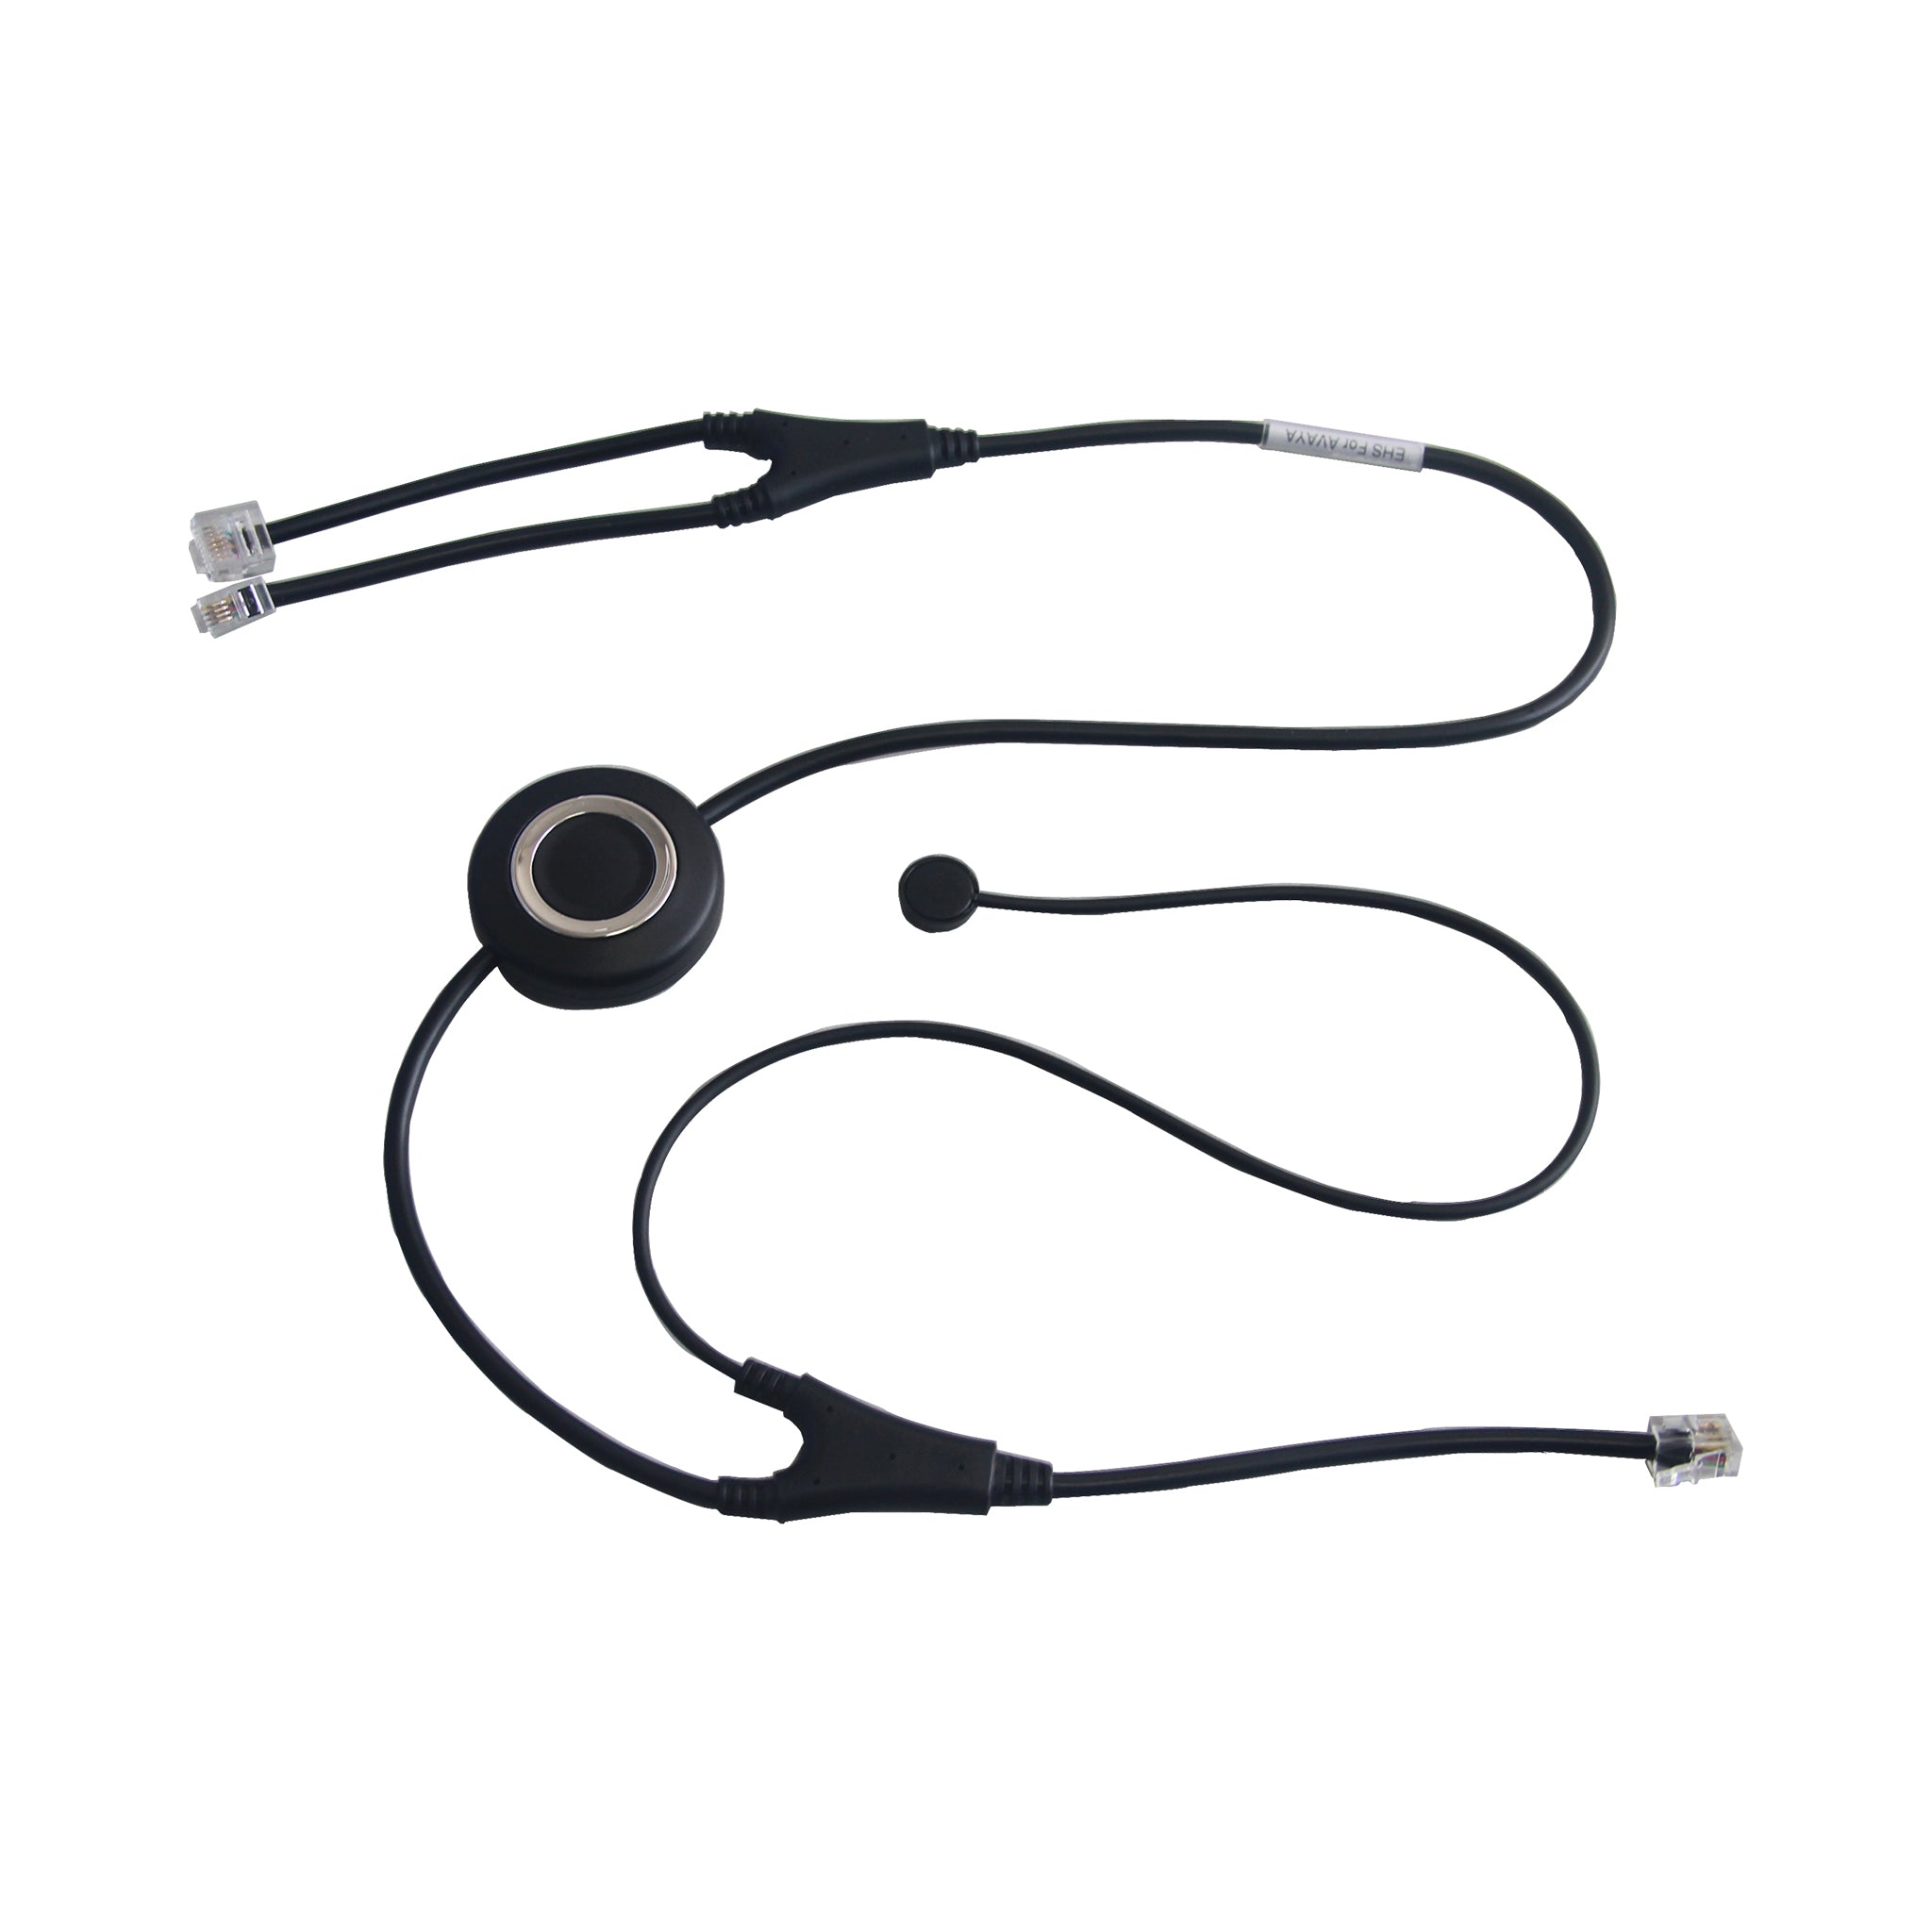 Vt Headset Cable Ehs5 * Ehs5 - Headsets Accessories